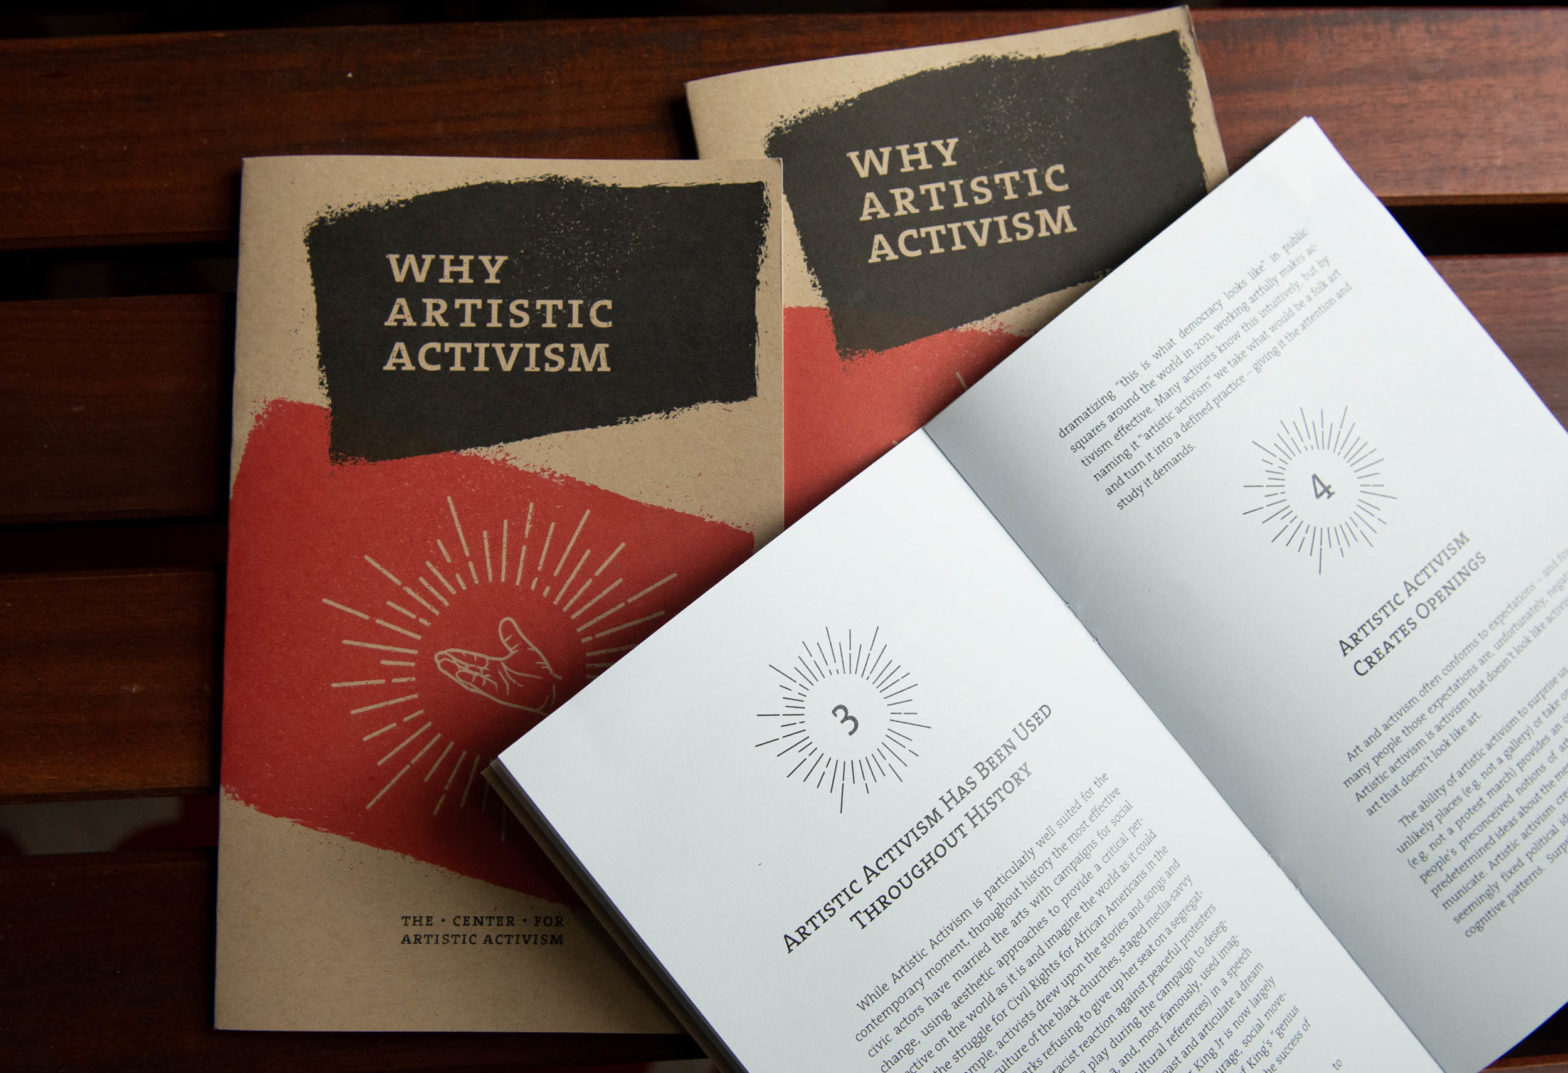 Publications of the Center for Artistic Activism